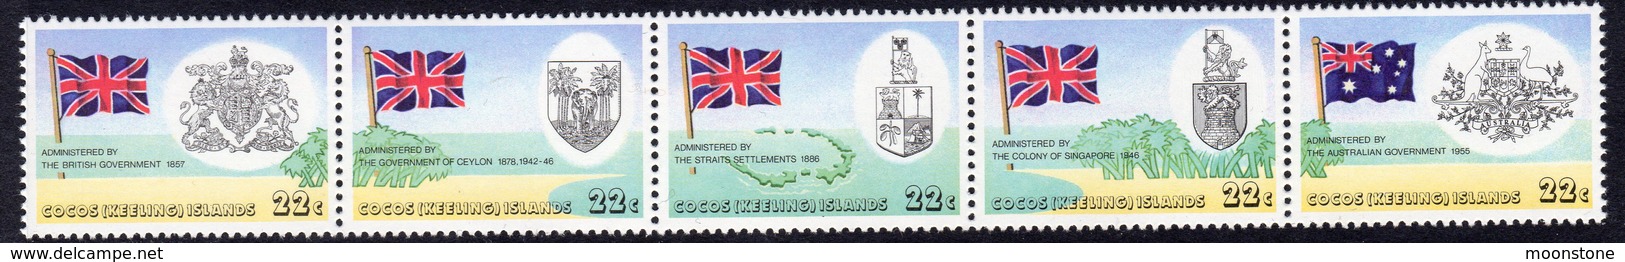 Cocos (Keeling) Islands 1980 25th Anniversary Of Territory Strip Of 5 (1 Fold), MNH, SG 53/7 (AU) - Cocos (Keeling) Islands